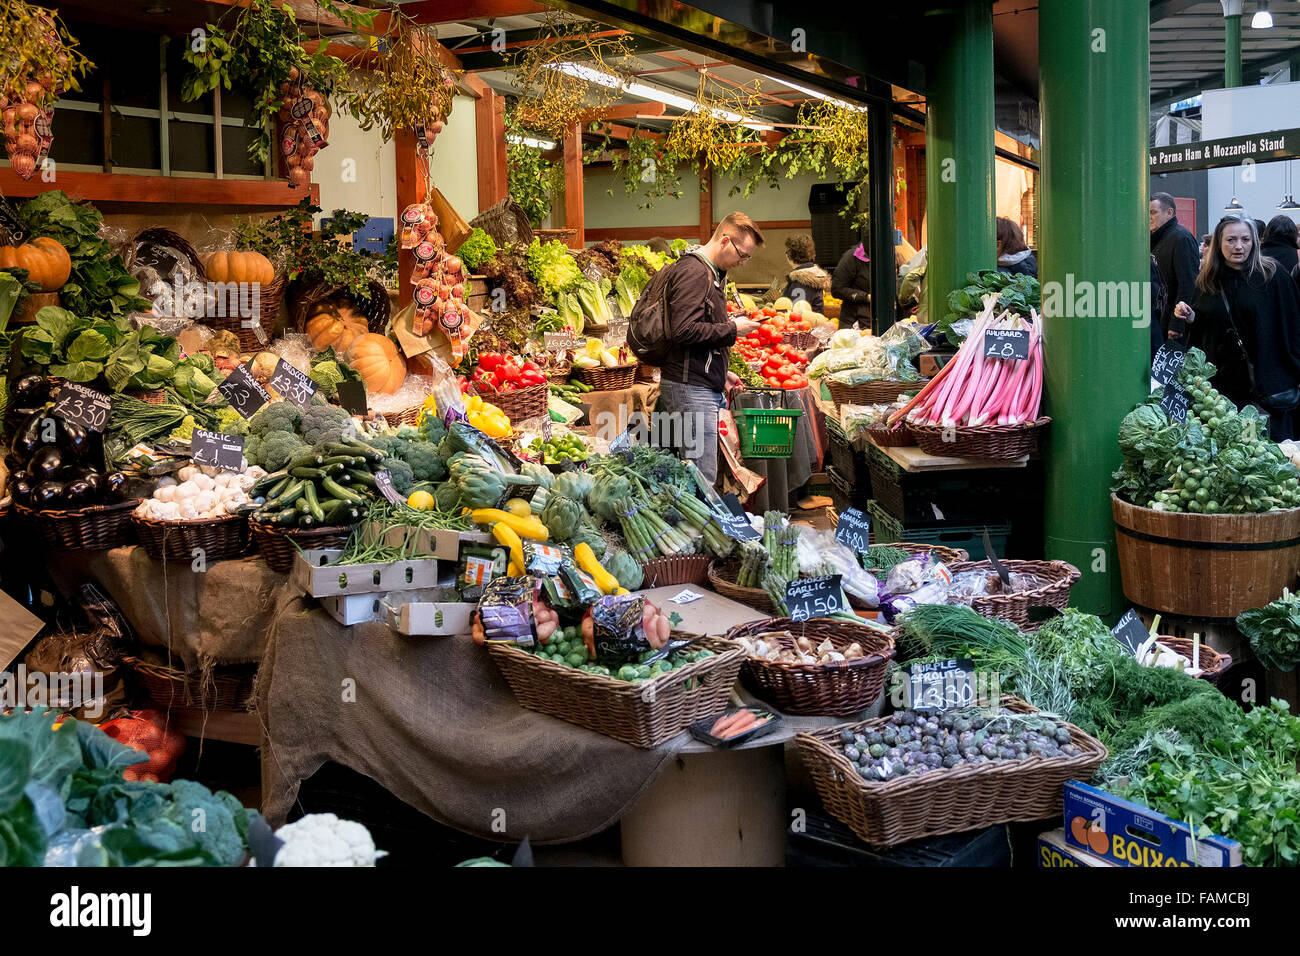 Fresh fruit and vegetables on sale in Borough Market in London. Stock Photo